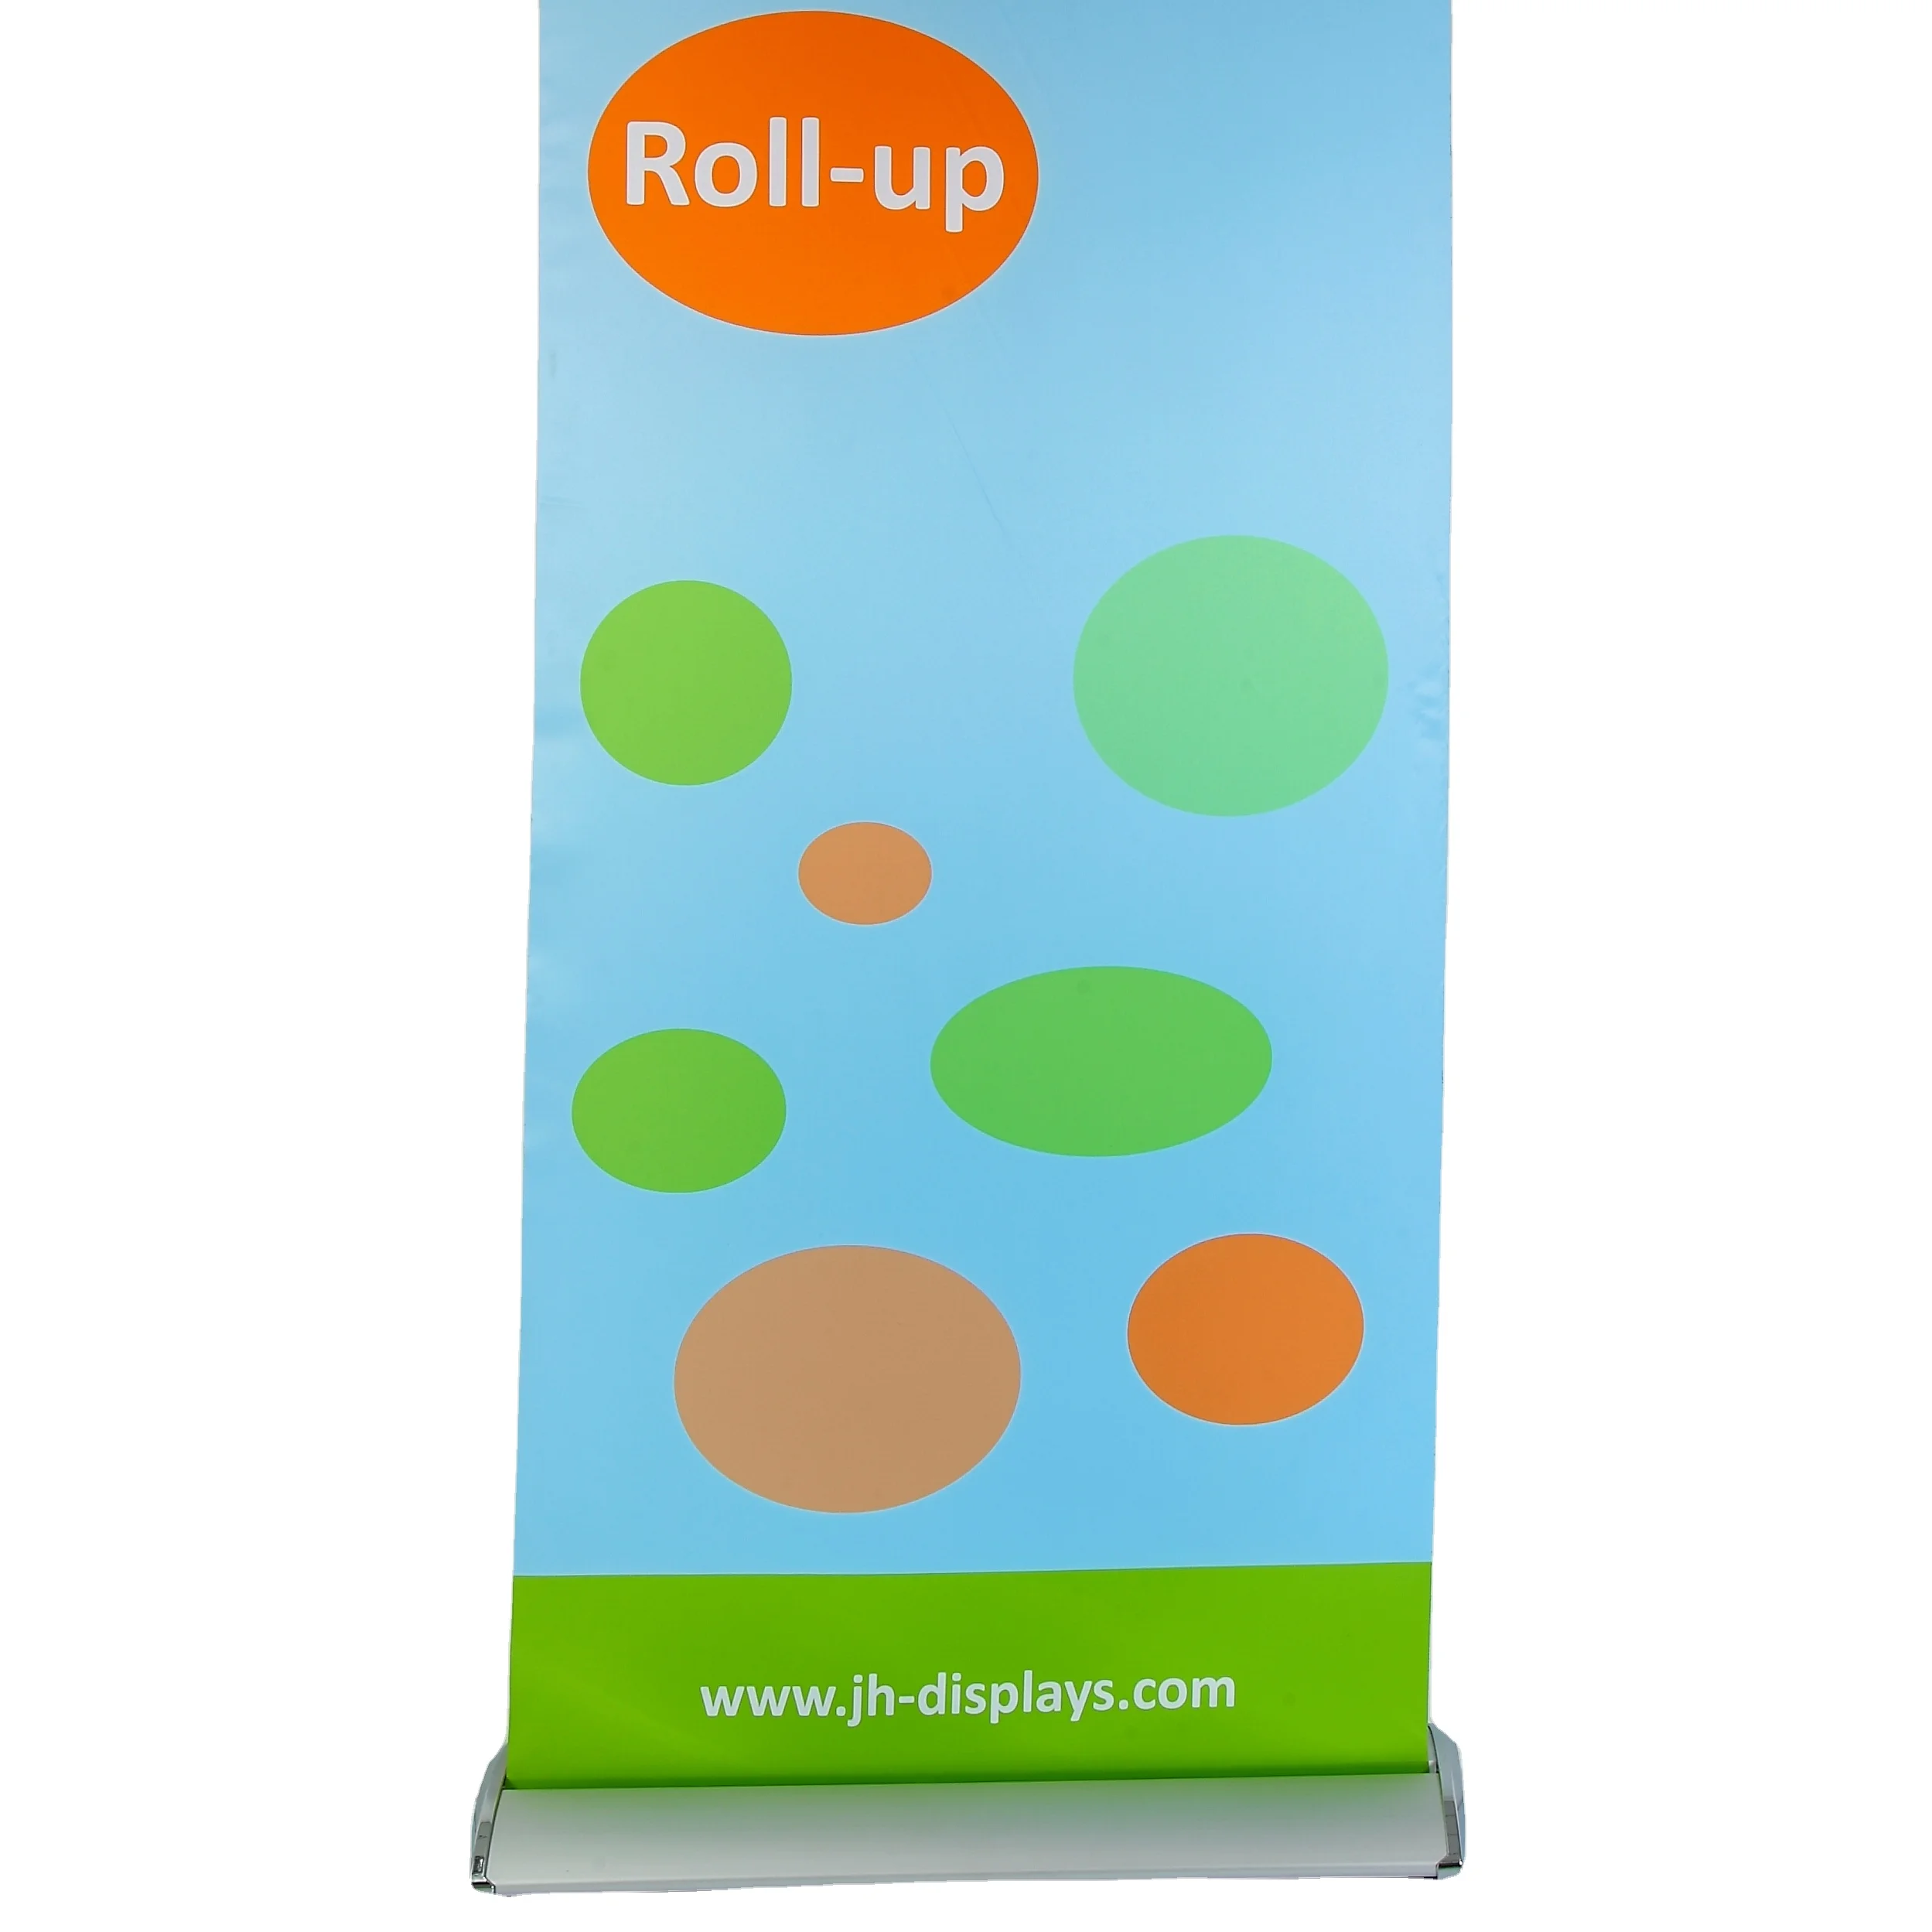 22cm wide base single side roll up banner roll up stand chromed side cover roll up stand